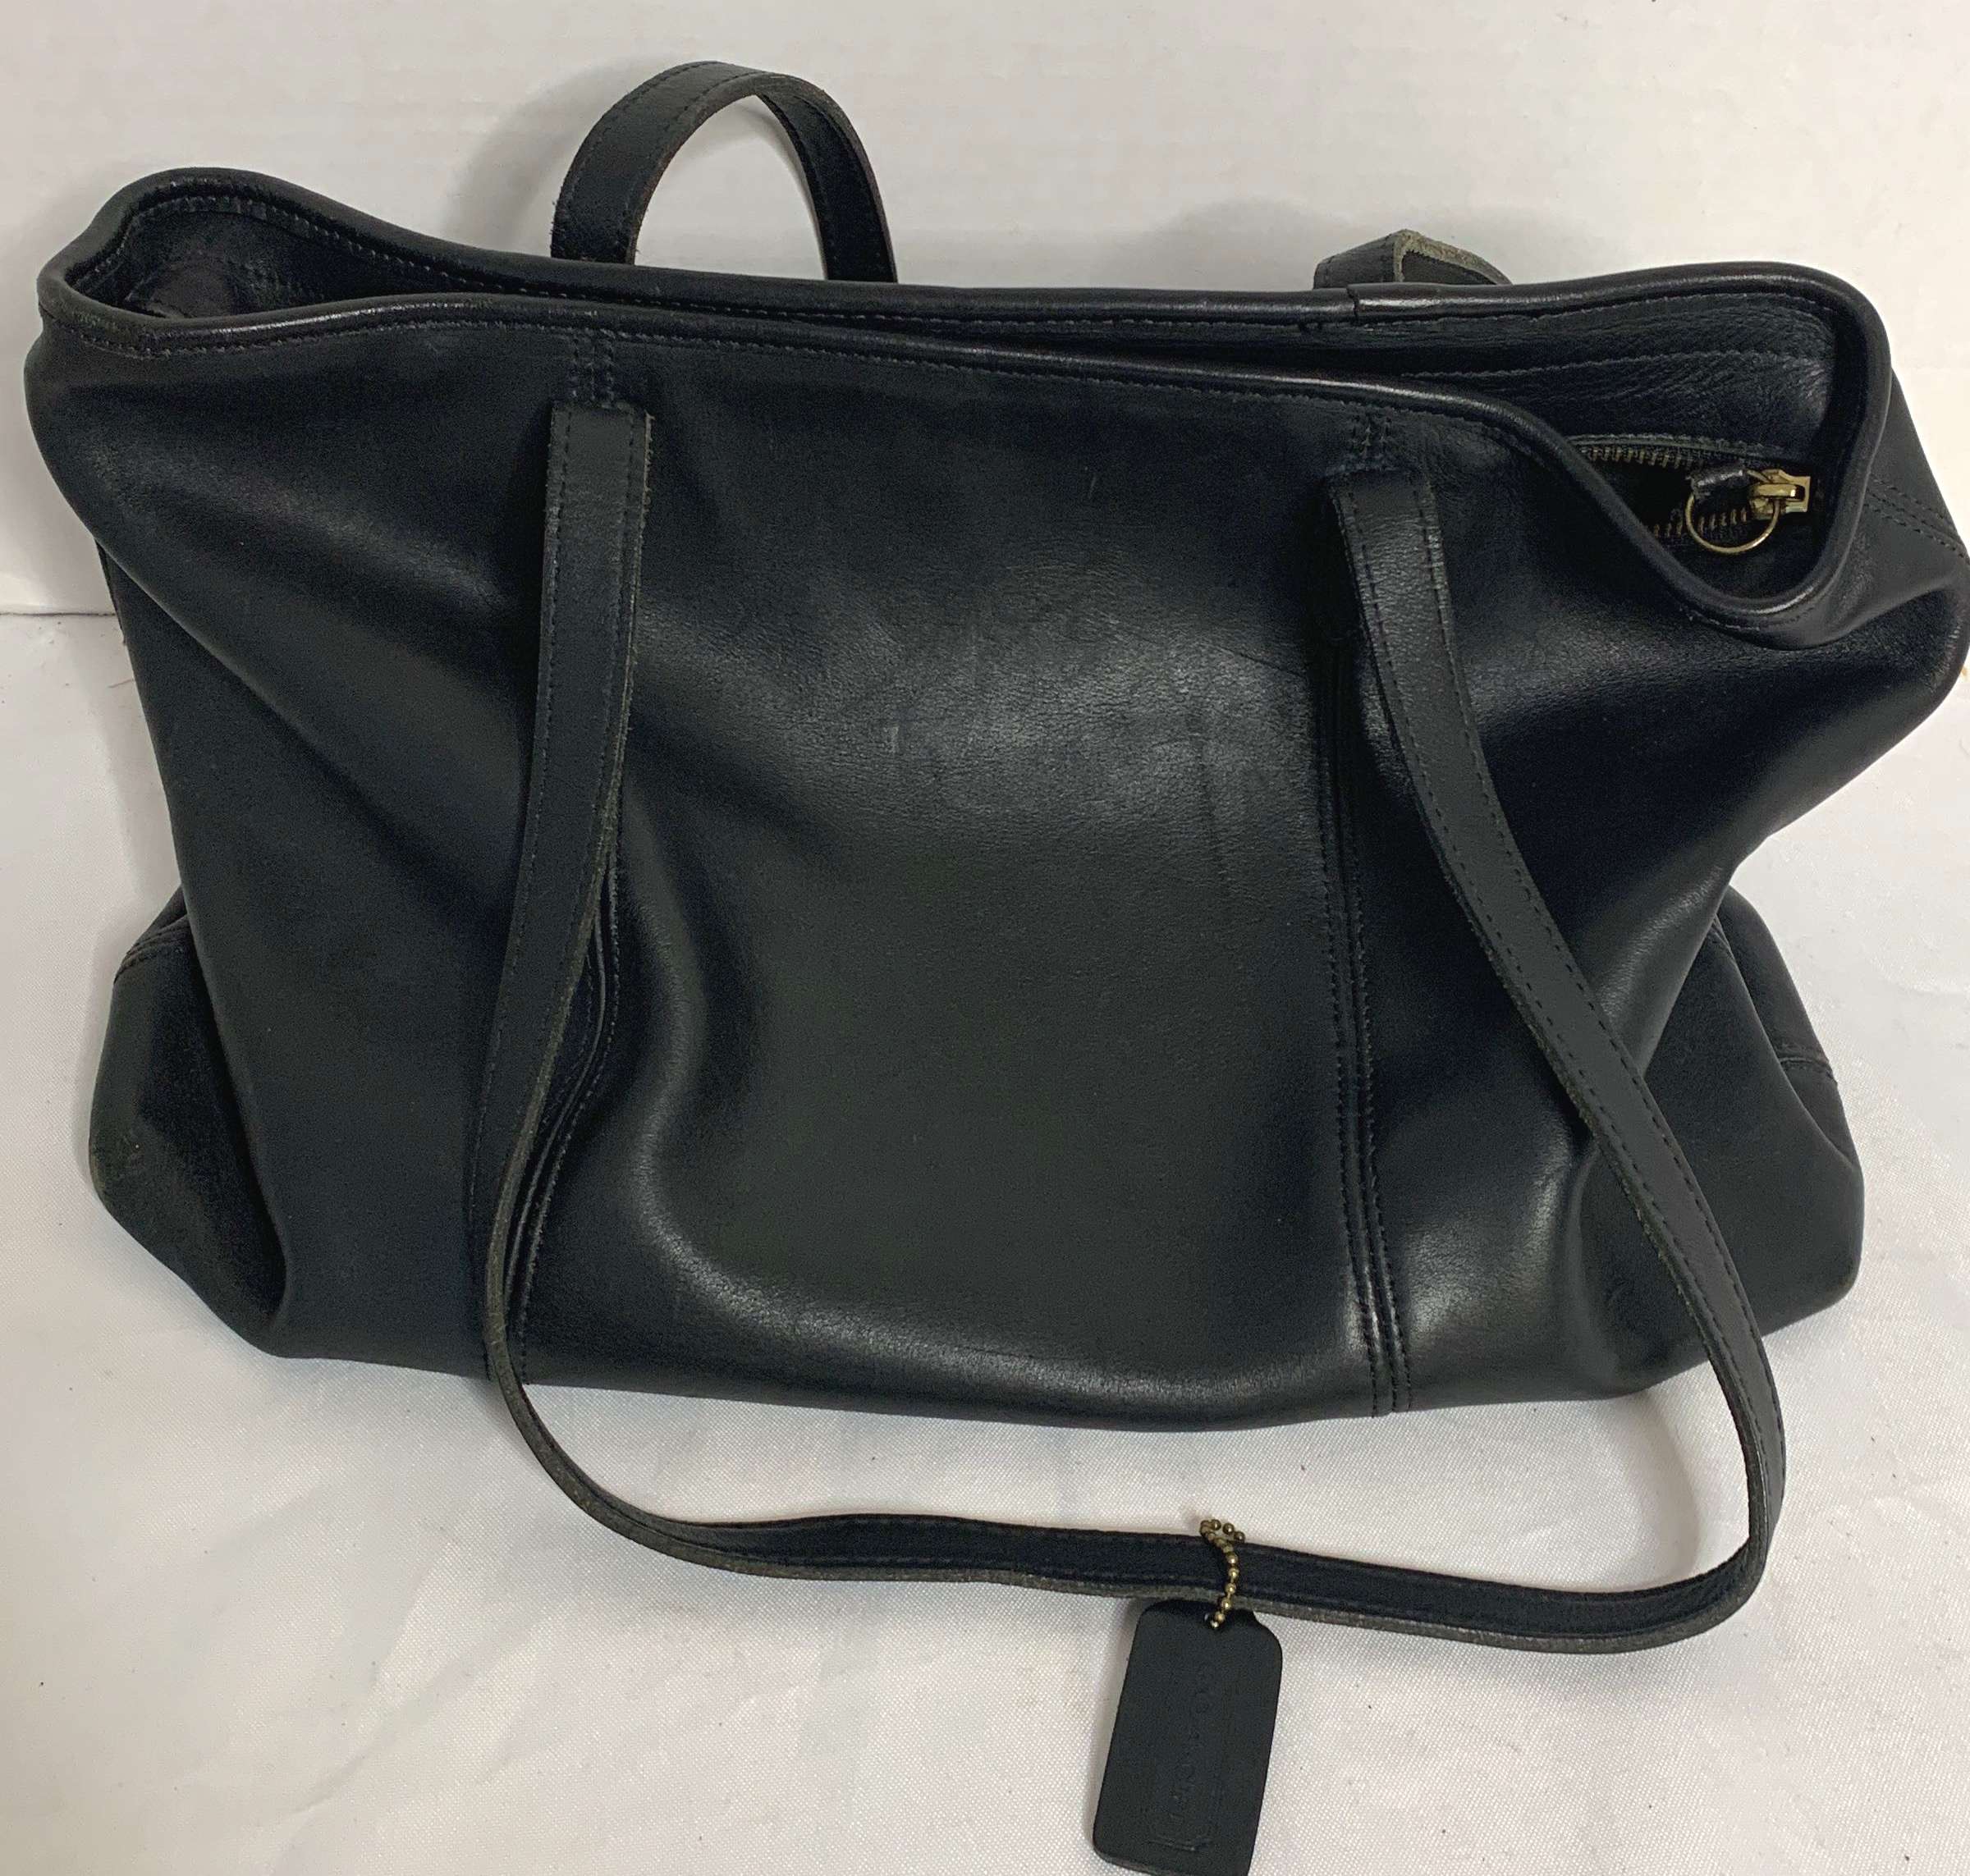 Vintage leather Coach bags purchased in the 1990s - Houston, TX Patch